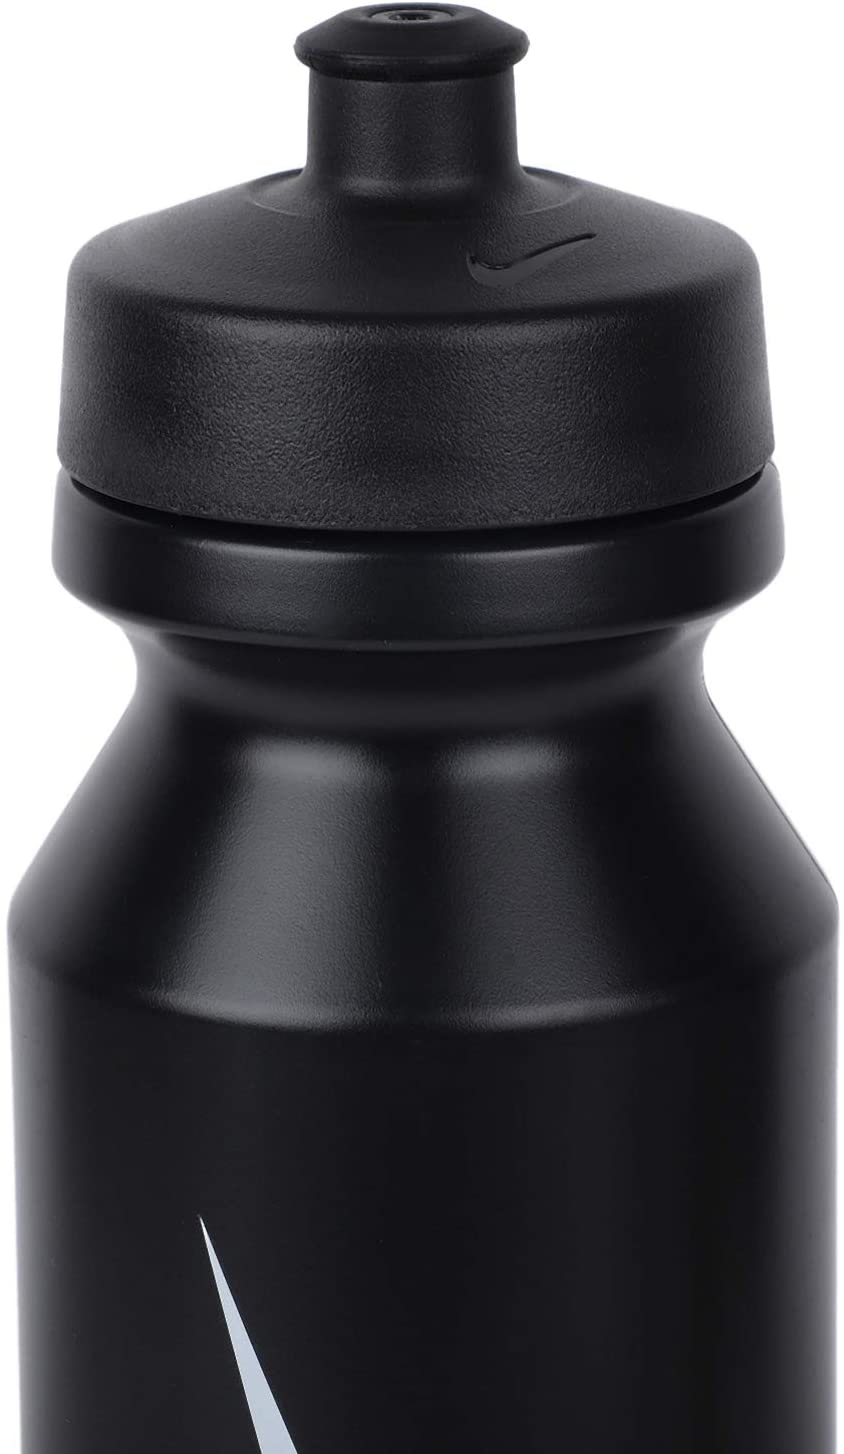 https://sportsreplay.ca/cdn/shop/products/Nike-Big-Mouth-Bottle-2_0-32-Oz-Sports-Replay-Sports-Excellence-Sports-Replay-Sports-Excellence-2.jpg?v=1651163370